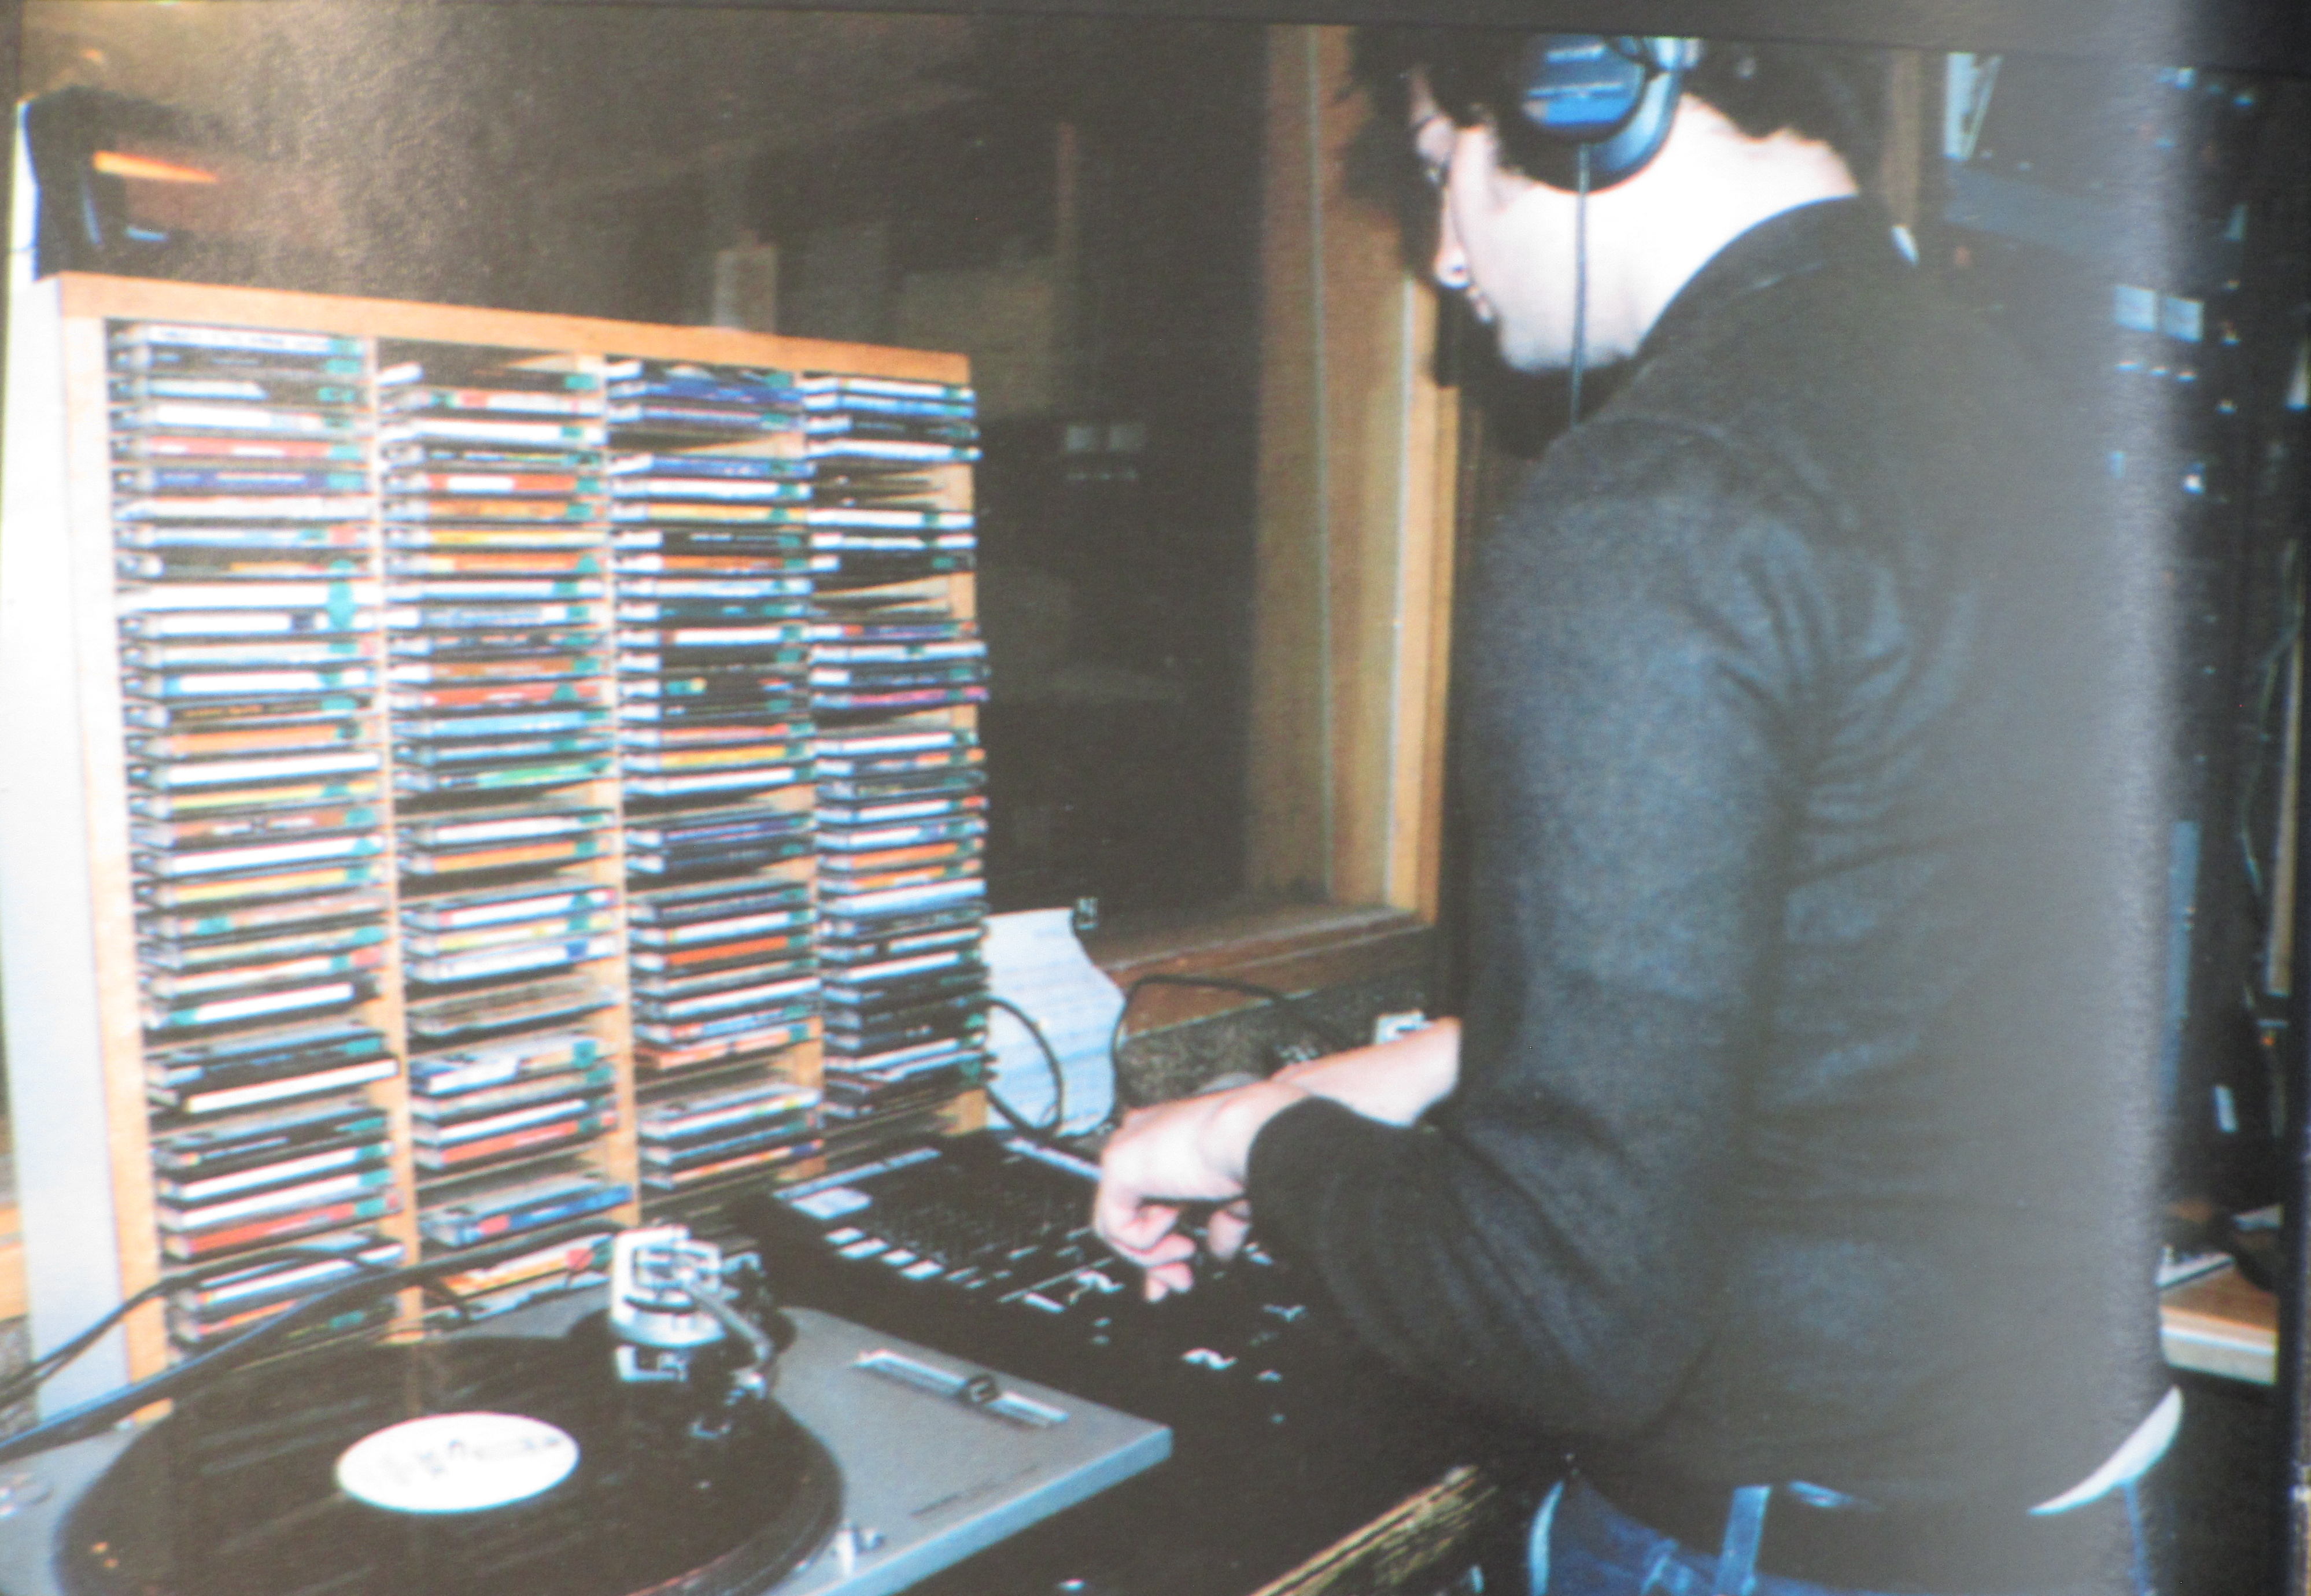 2001 - Spinning the disks from Studio B